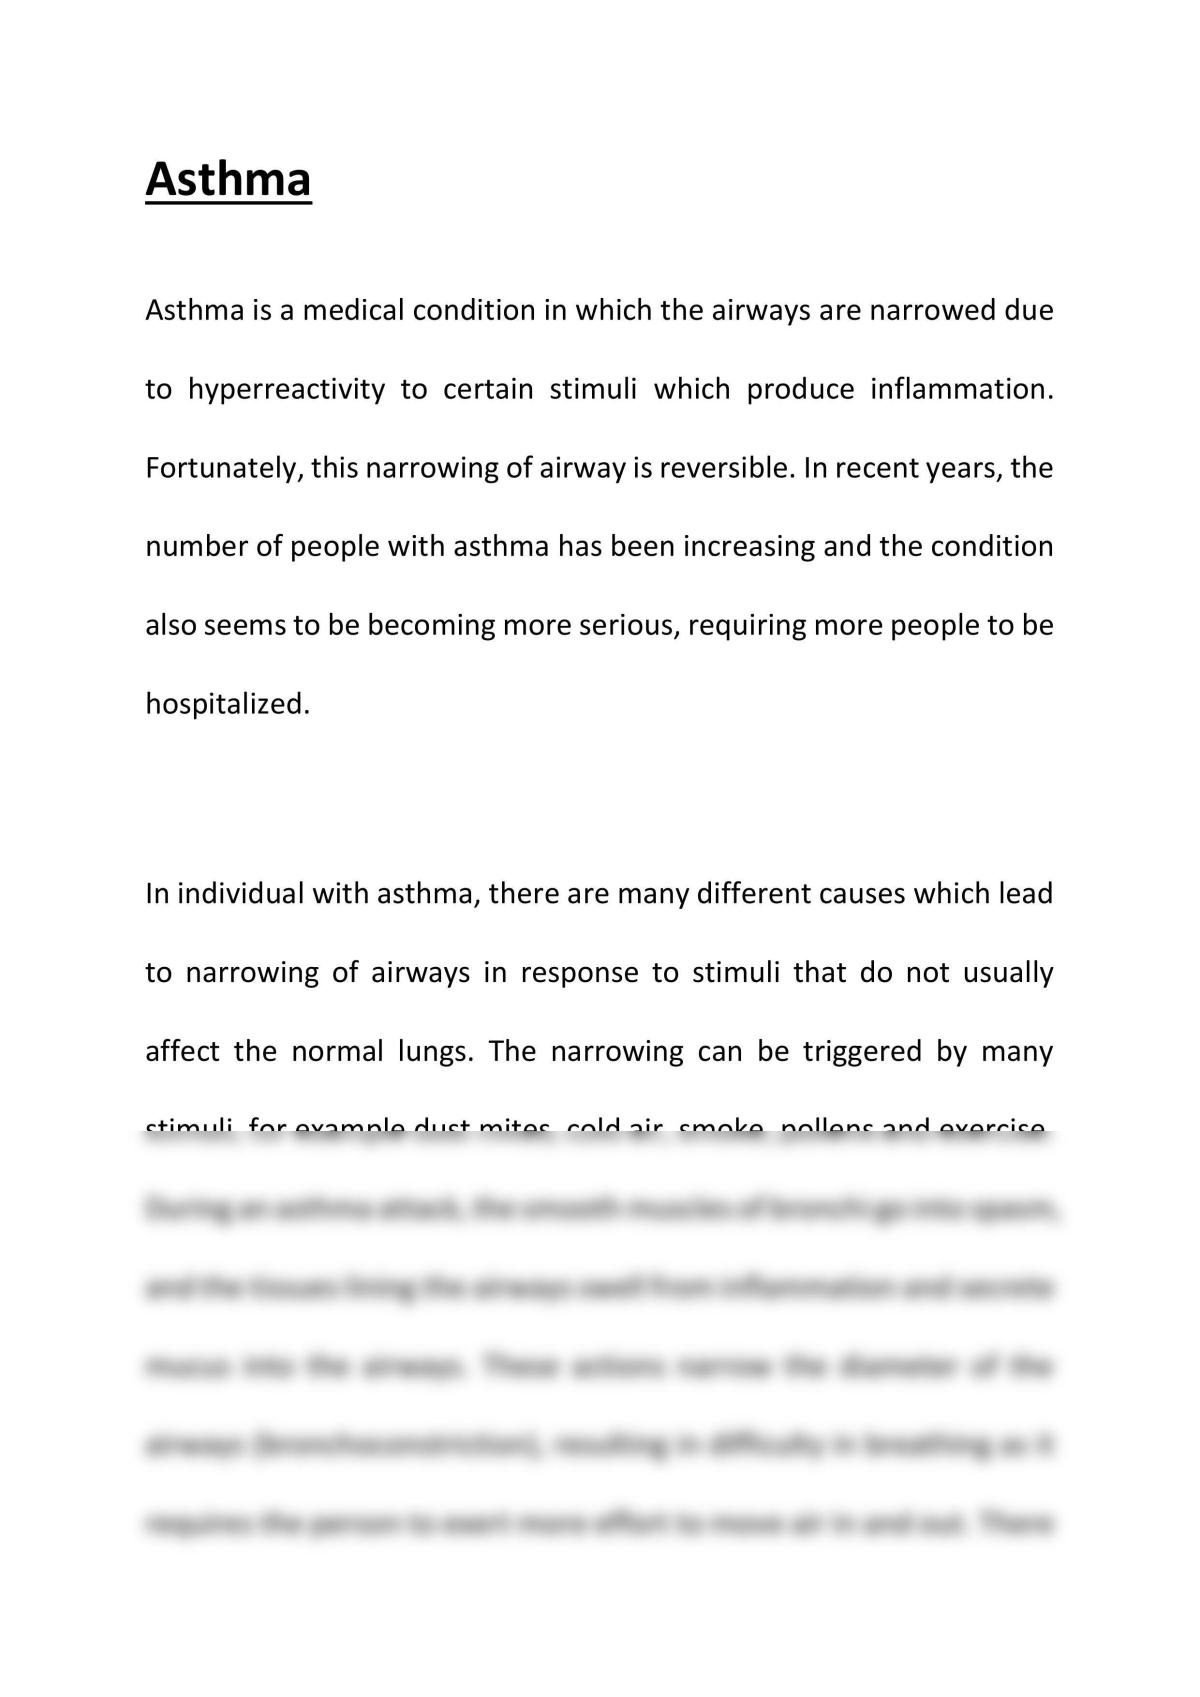 prevention of asthma essay